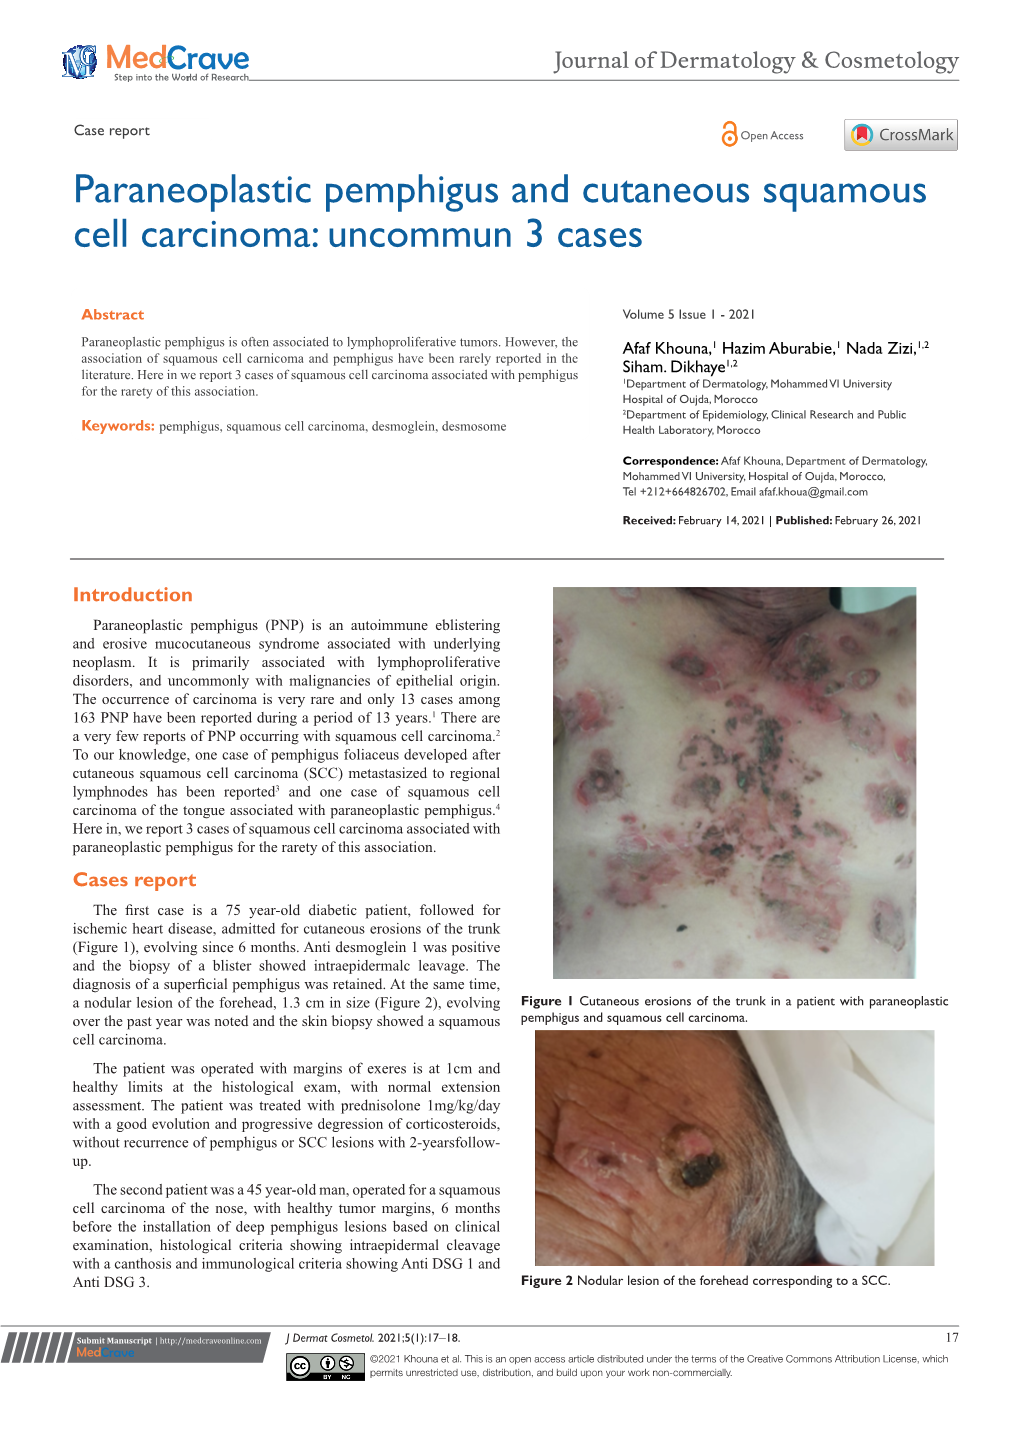 Paraneoplastic Pemphigus and Cutaneous Squamous Cell Carcinoma: Uncommun 3 Cases